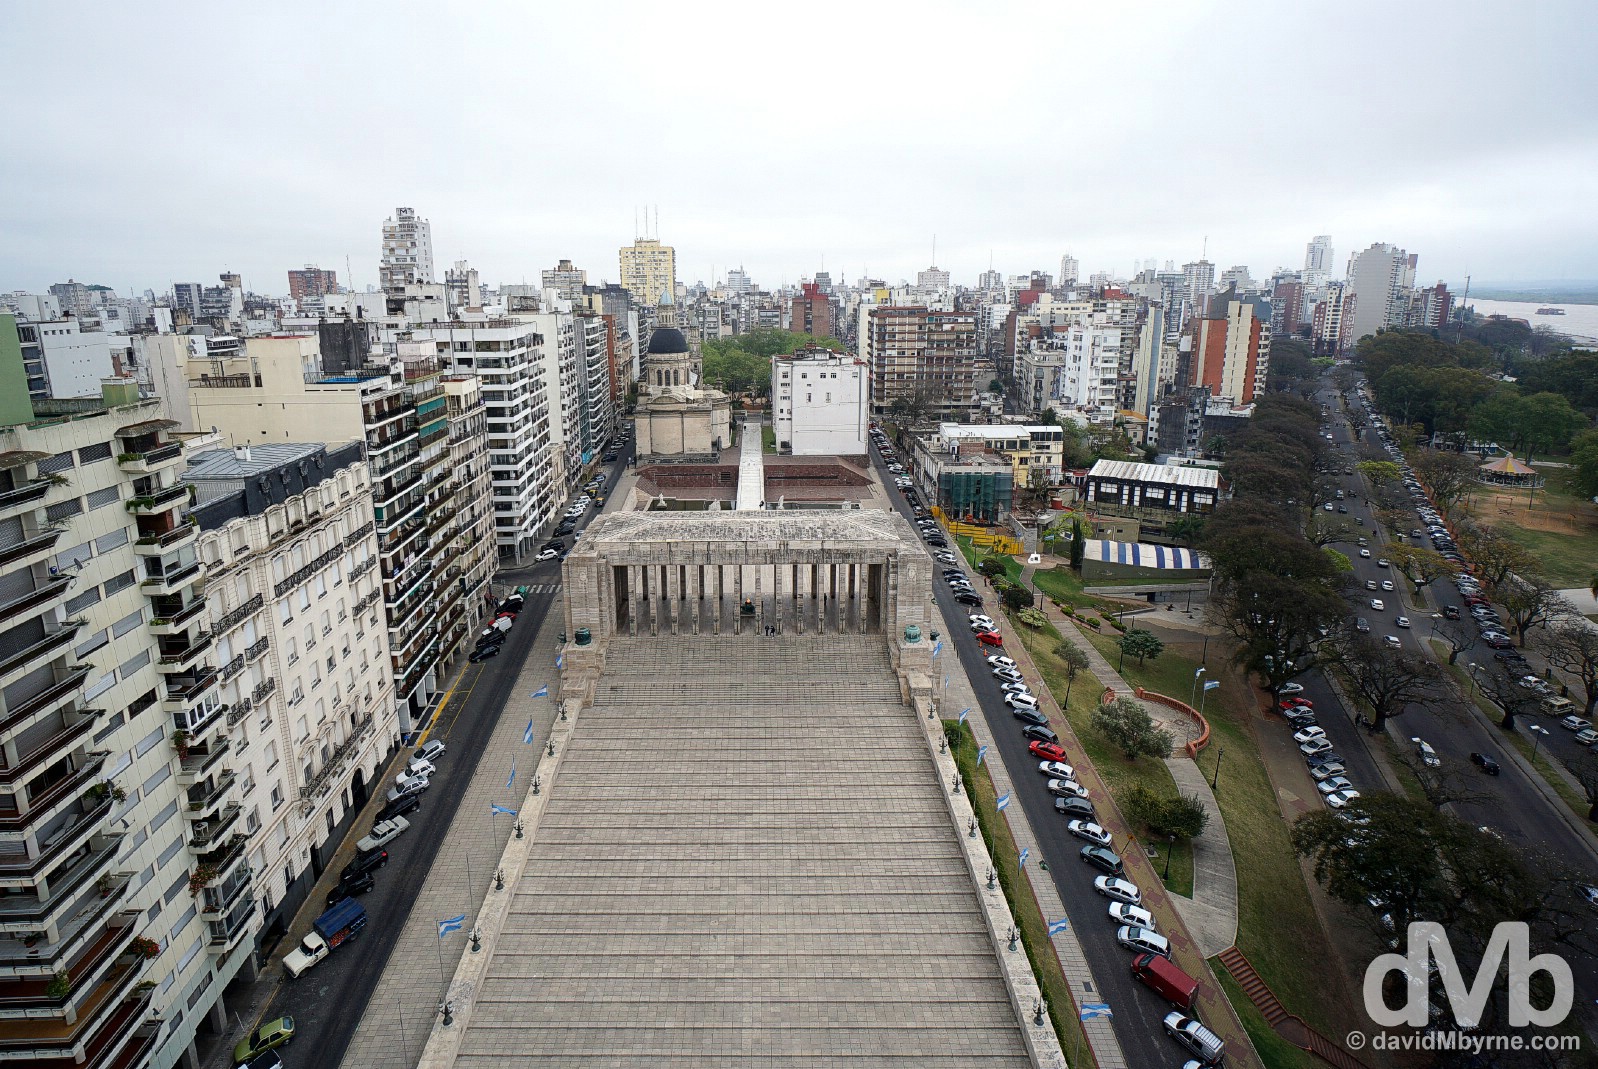 An overview of Rosario from the top of the Monumento a la Bandera in Roasrio, Argentina. September 22, 2015. 